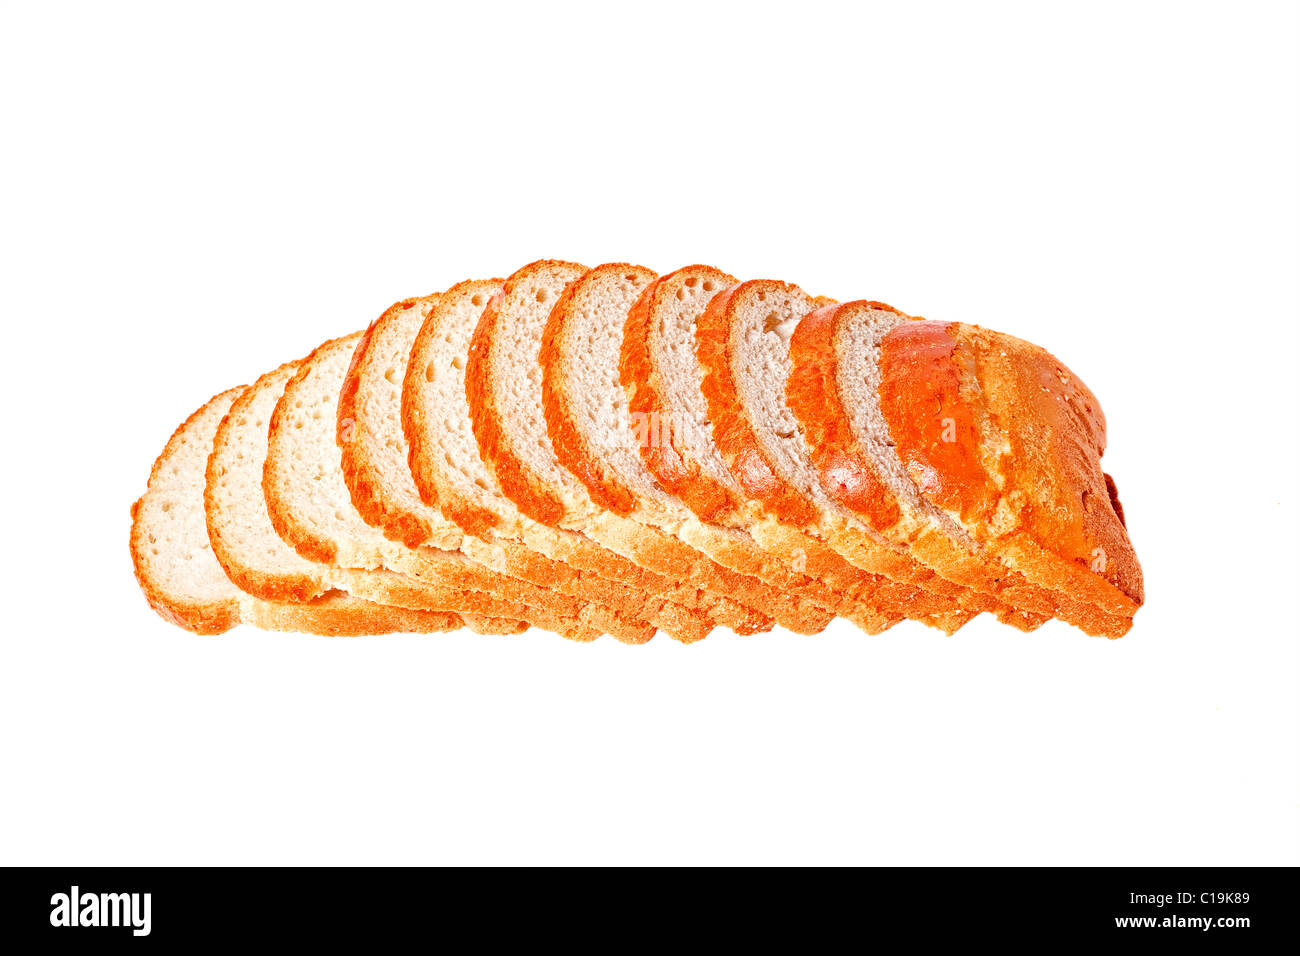 loaf of bread sliced  isolated on a white background Stock Photo